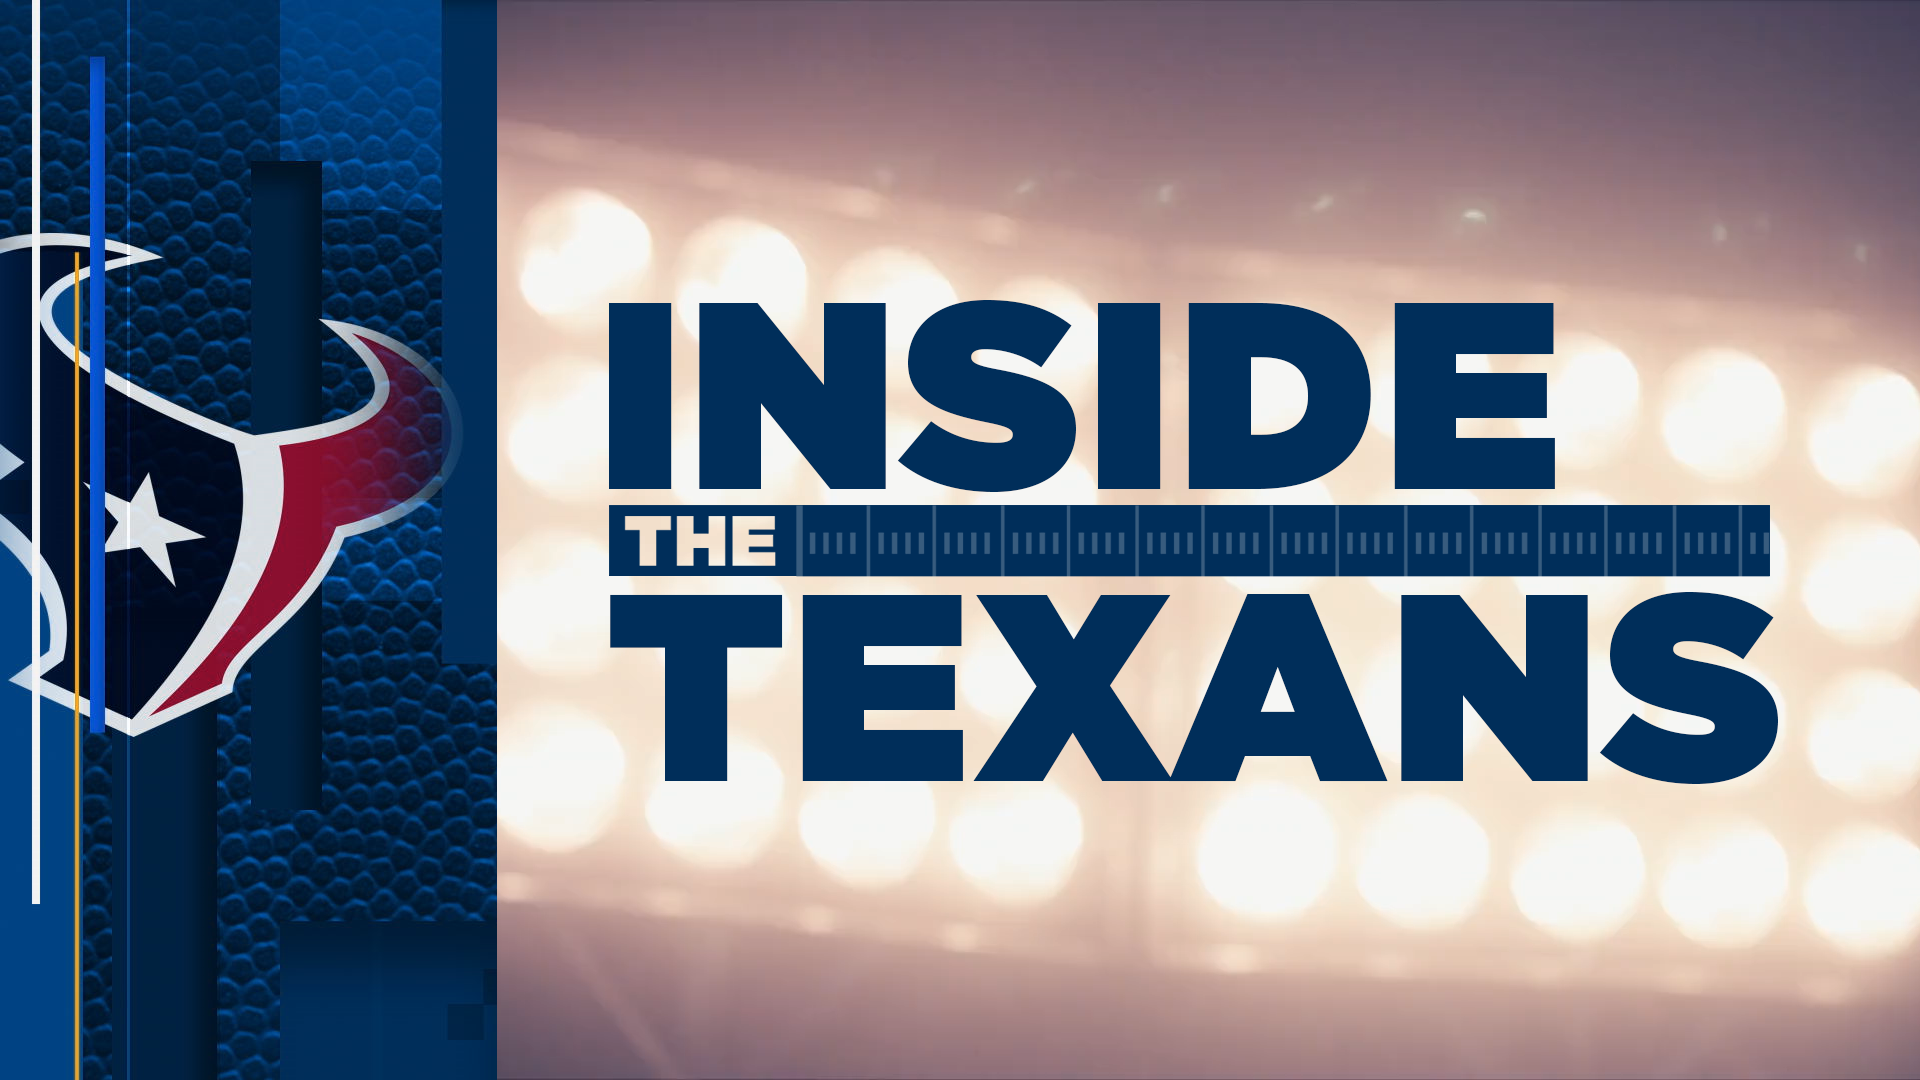 Inside the Texans